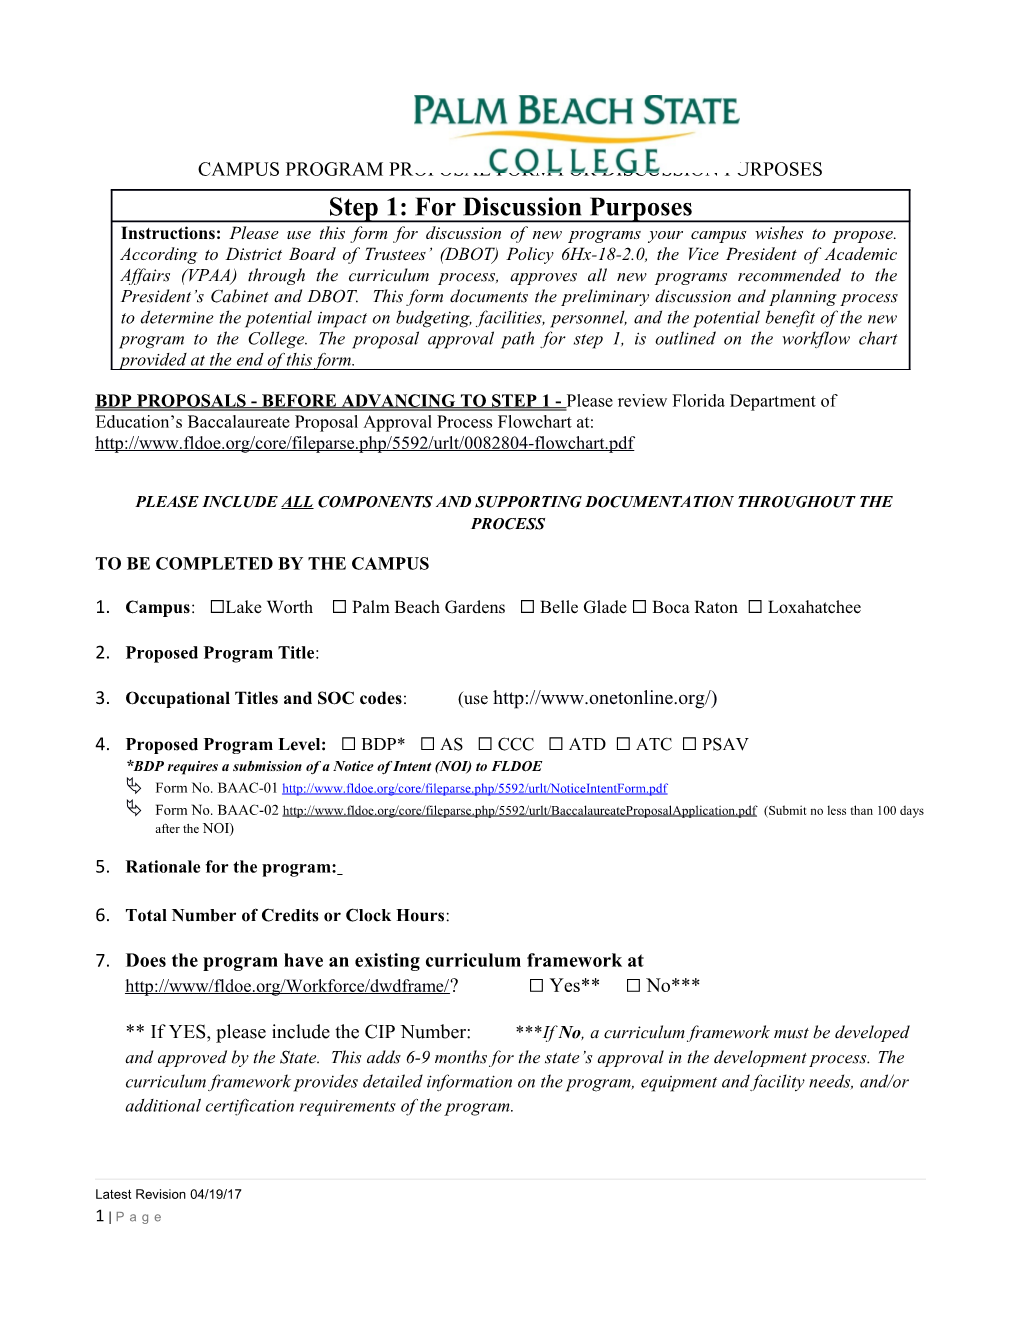 Campus Program Proposal Form for Discussion Purposes